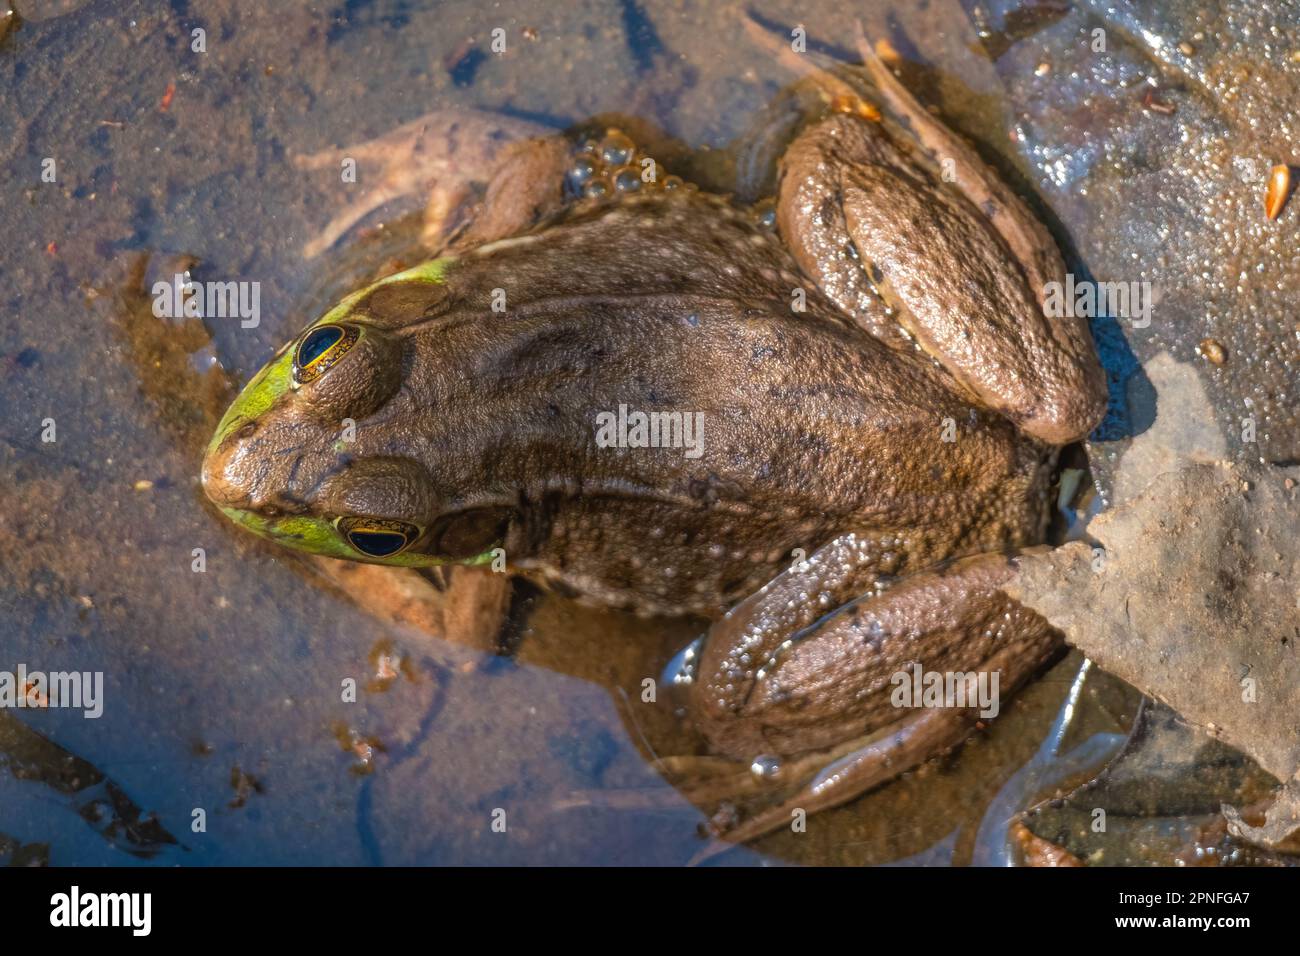 Top view of a Northern Green Frog. Raleigh, North Carolina. Stock Photo